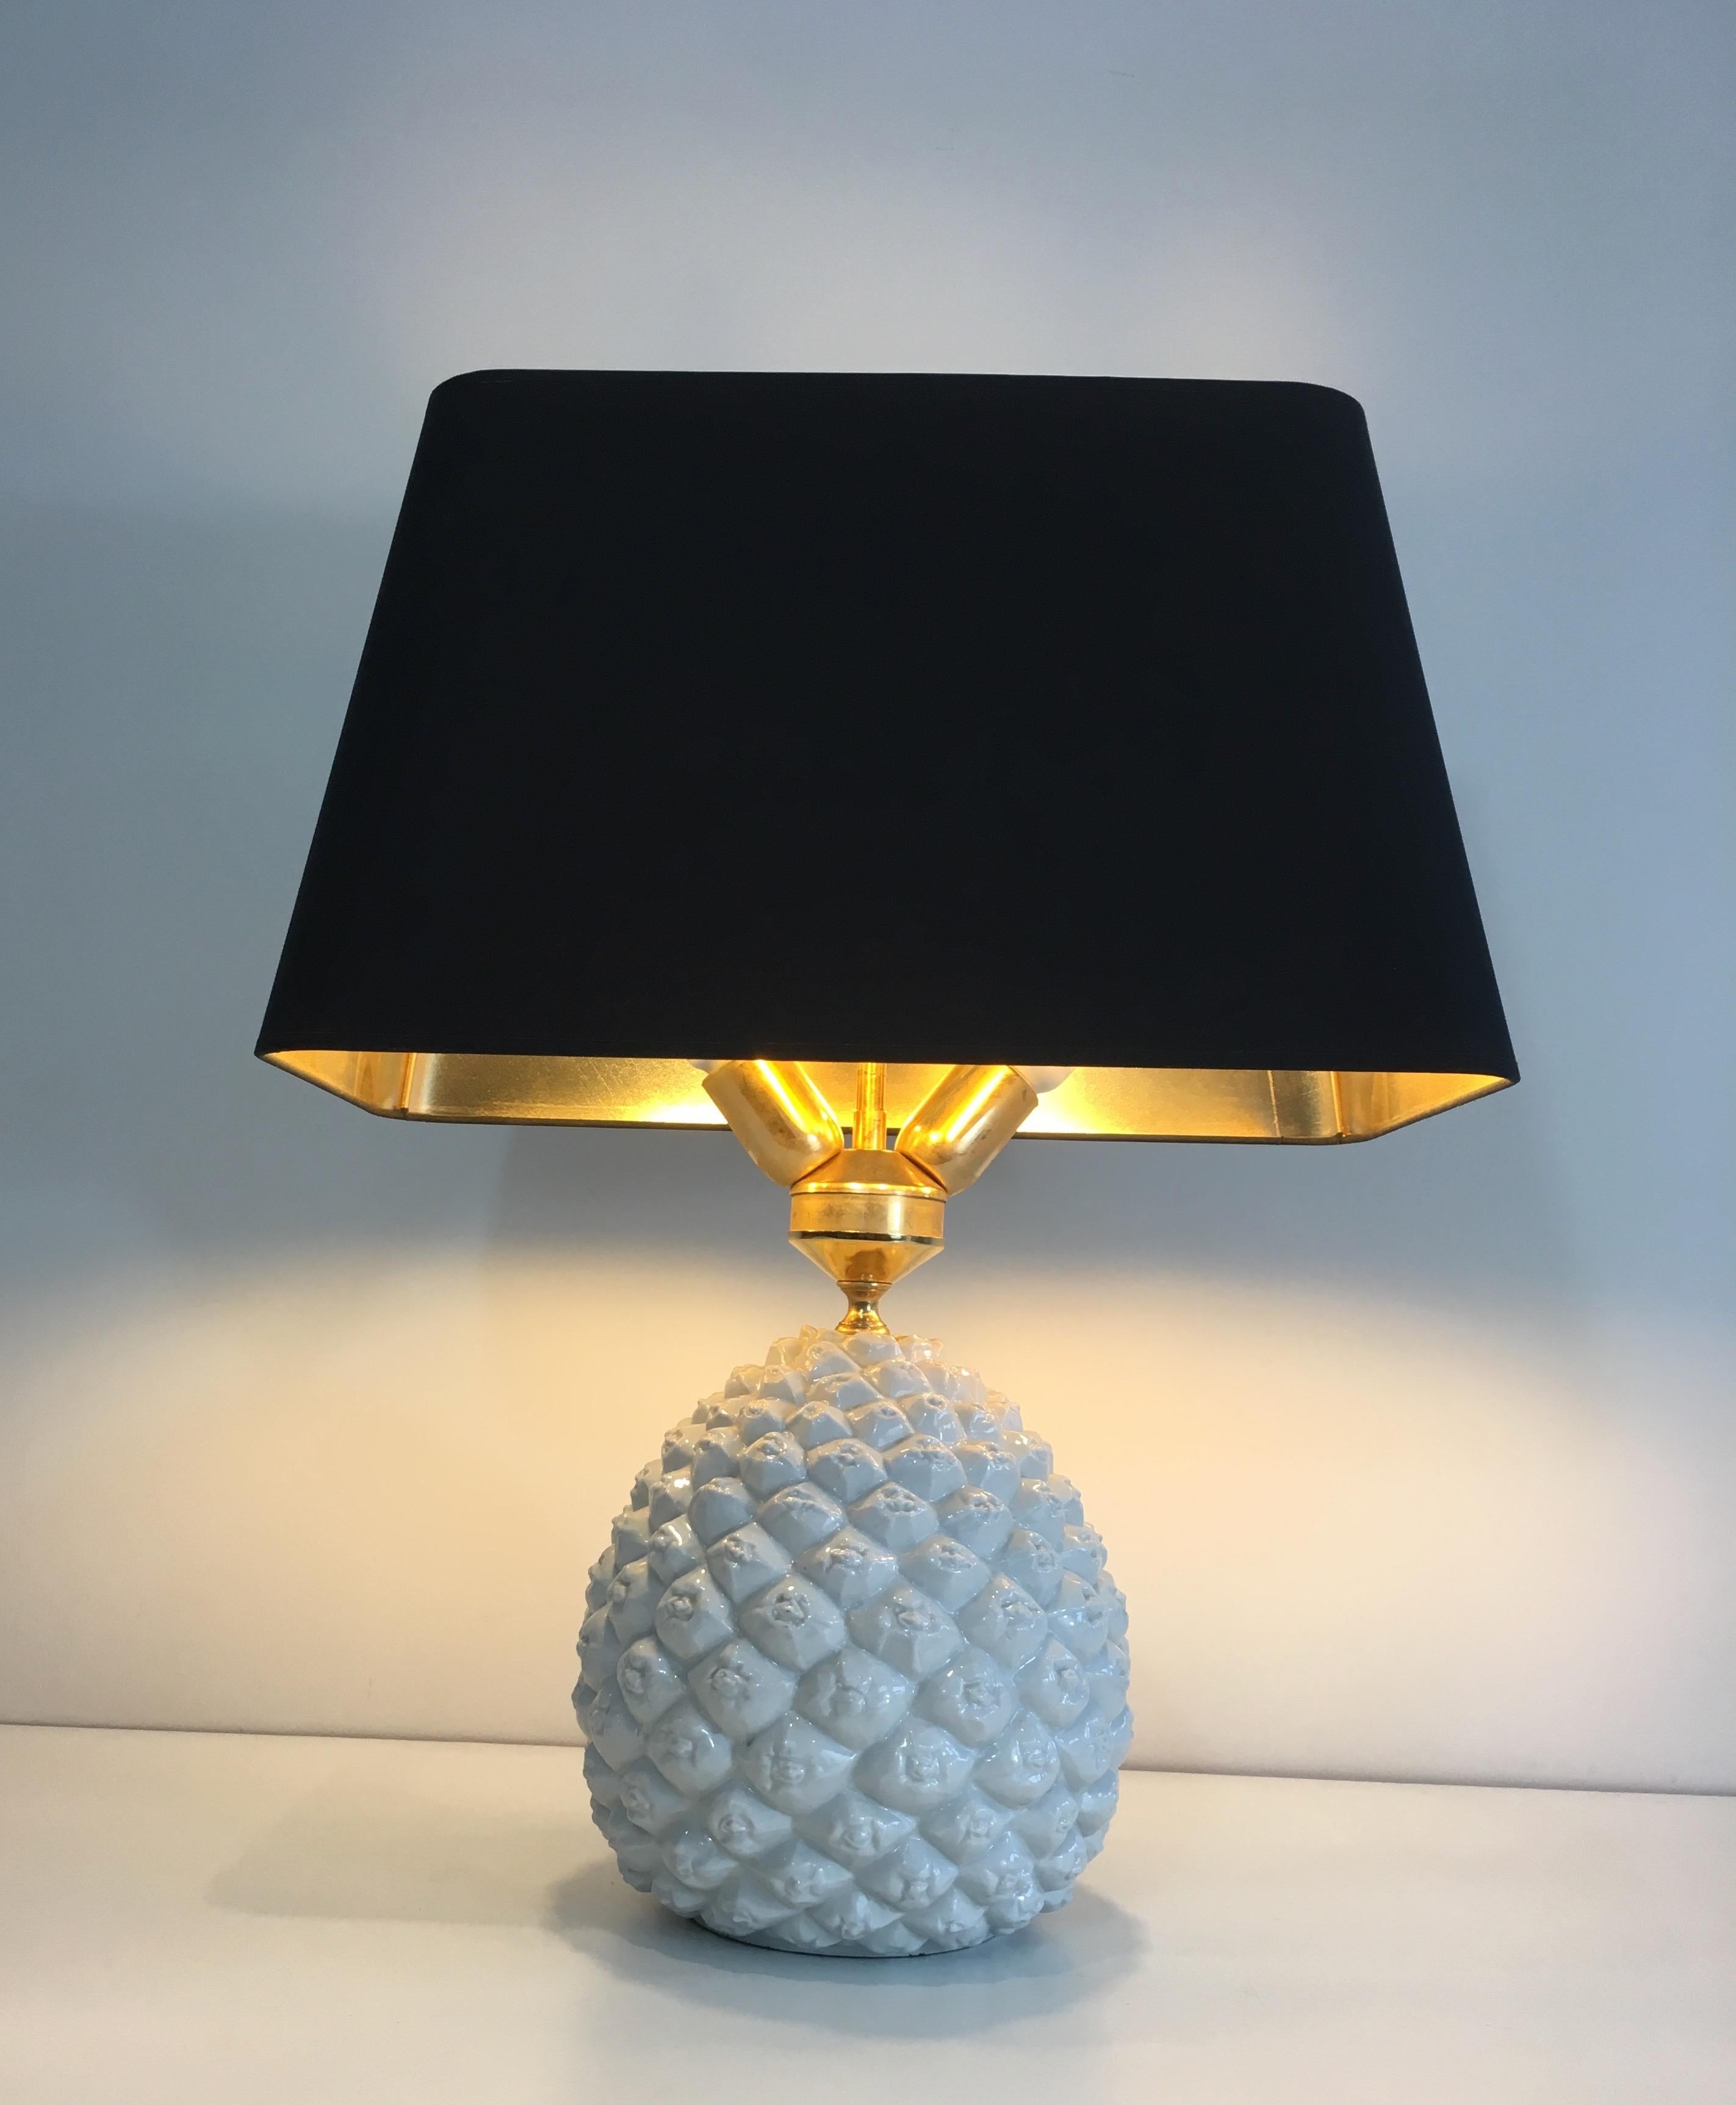 French Design Pineapple Porcelain Table Lamp, Italy, circa 1970 For Sale